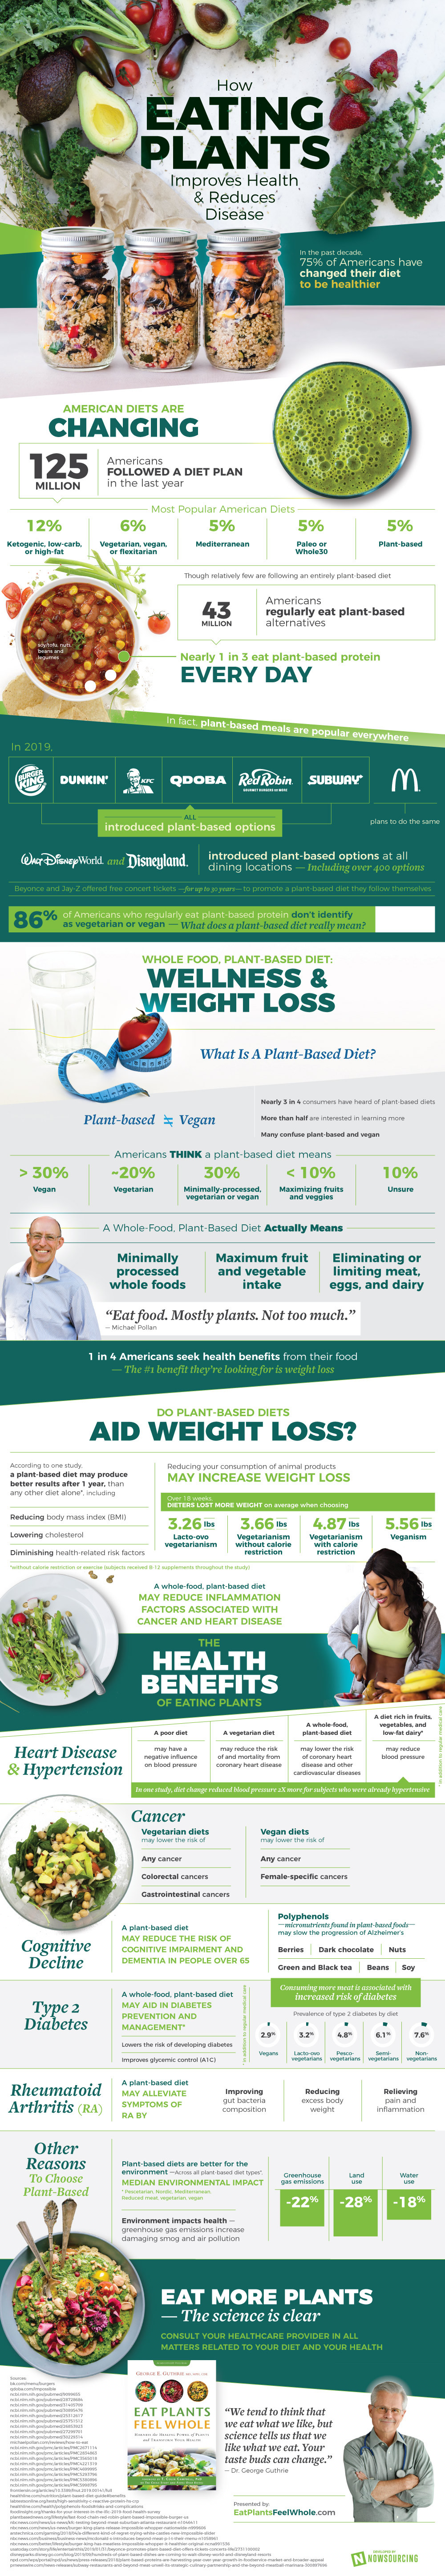 AdventHealth Plant Based Diet Infographic.